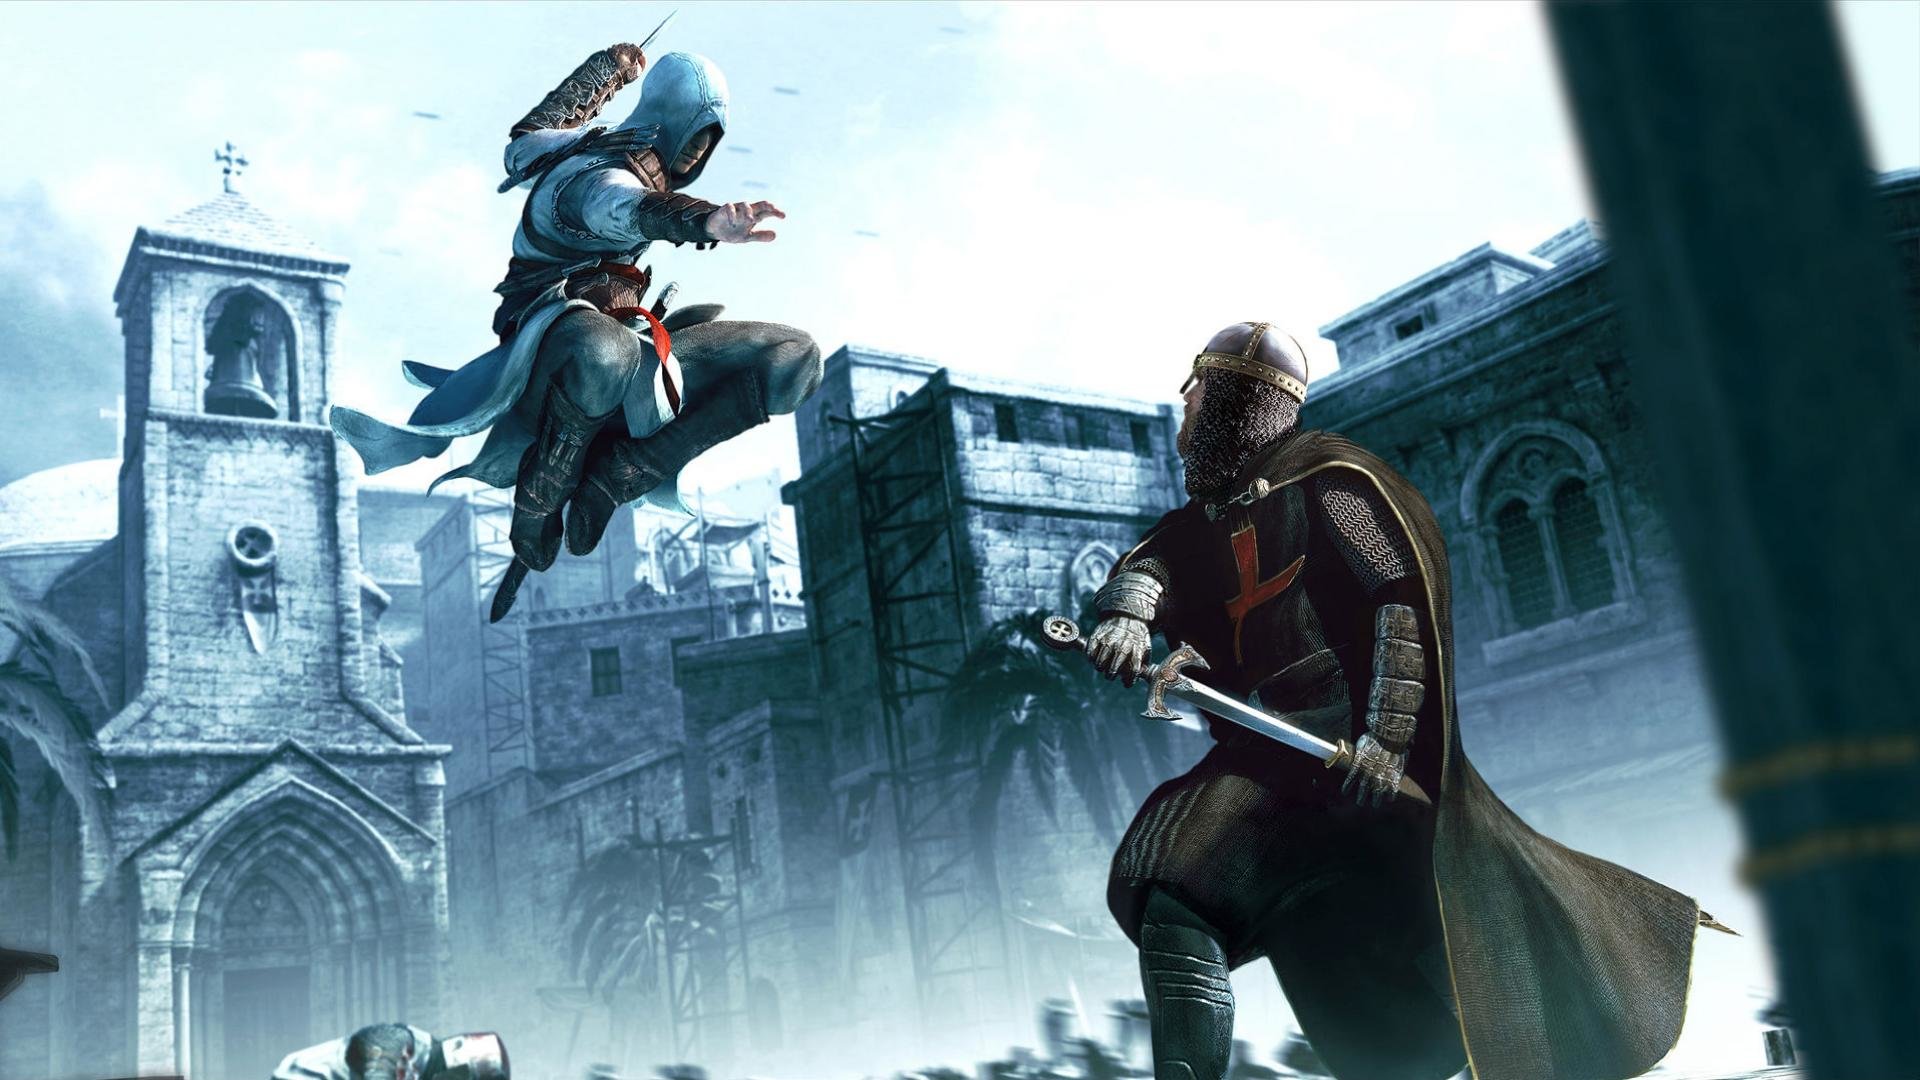 Download 1080p Assassin's Creed desktop wallpaper ID:188257 for free